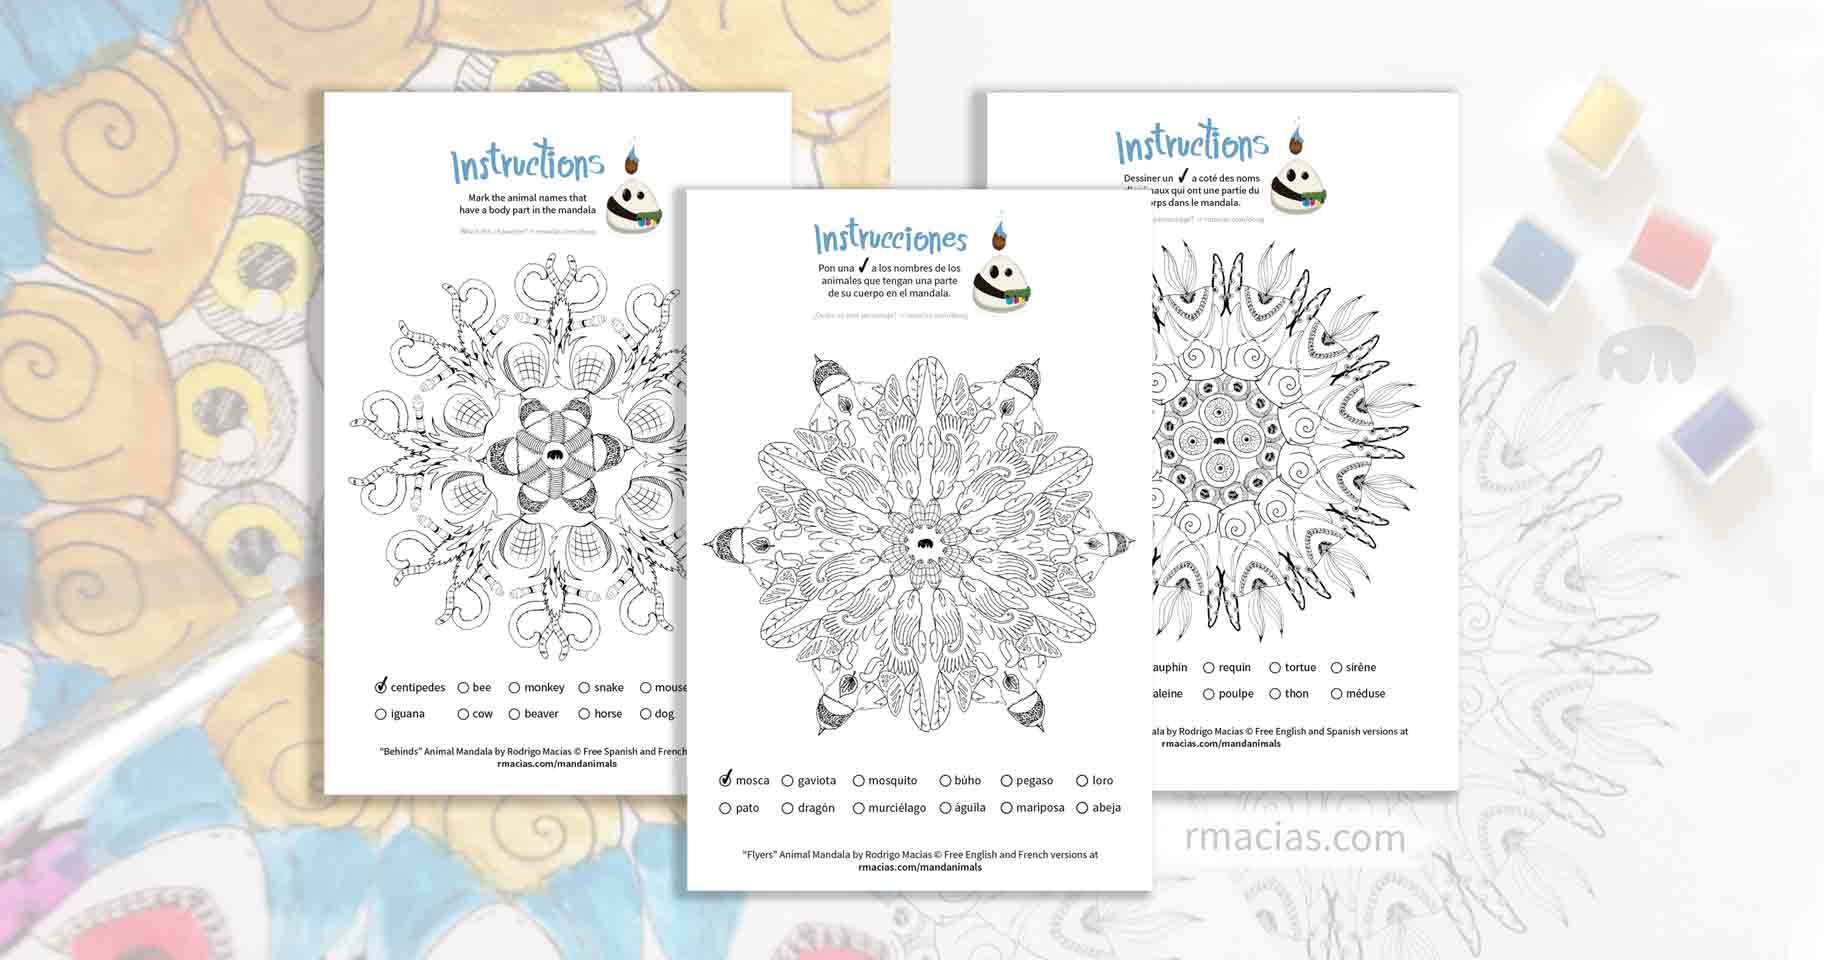 Coloring activity of animal mandalas that can be used as a coloring language activity so children can practice vocabulary of animal names in English, French and Spanish, by matching those names with the animal body parts that form each design. By kids activities designer Rodrigo Macias